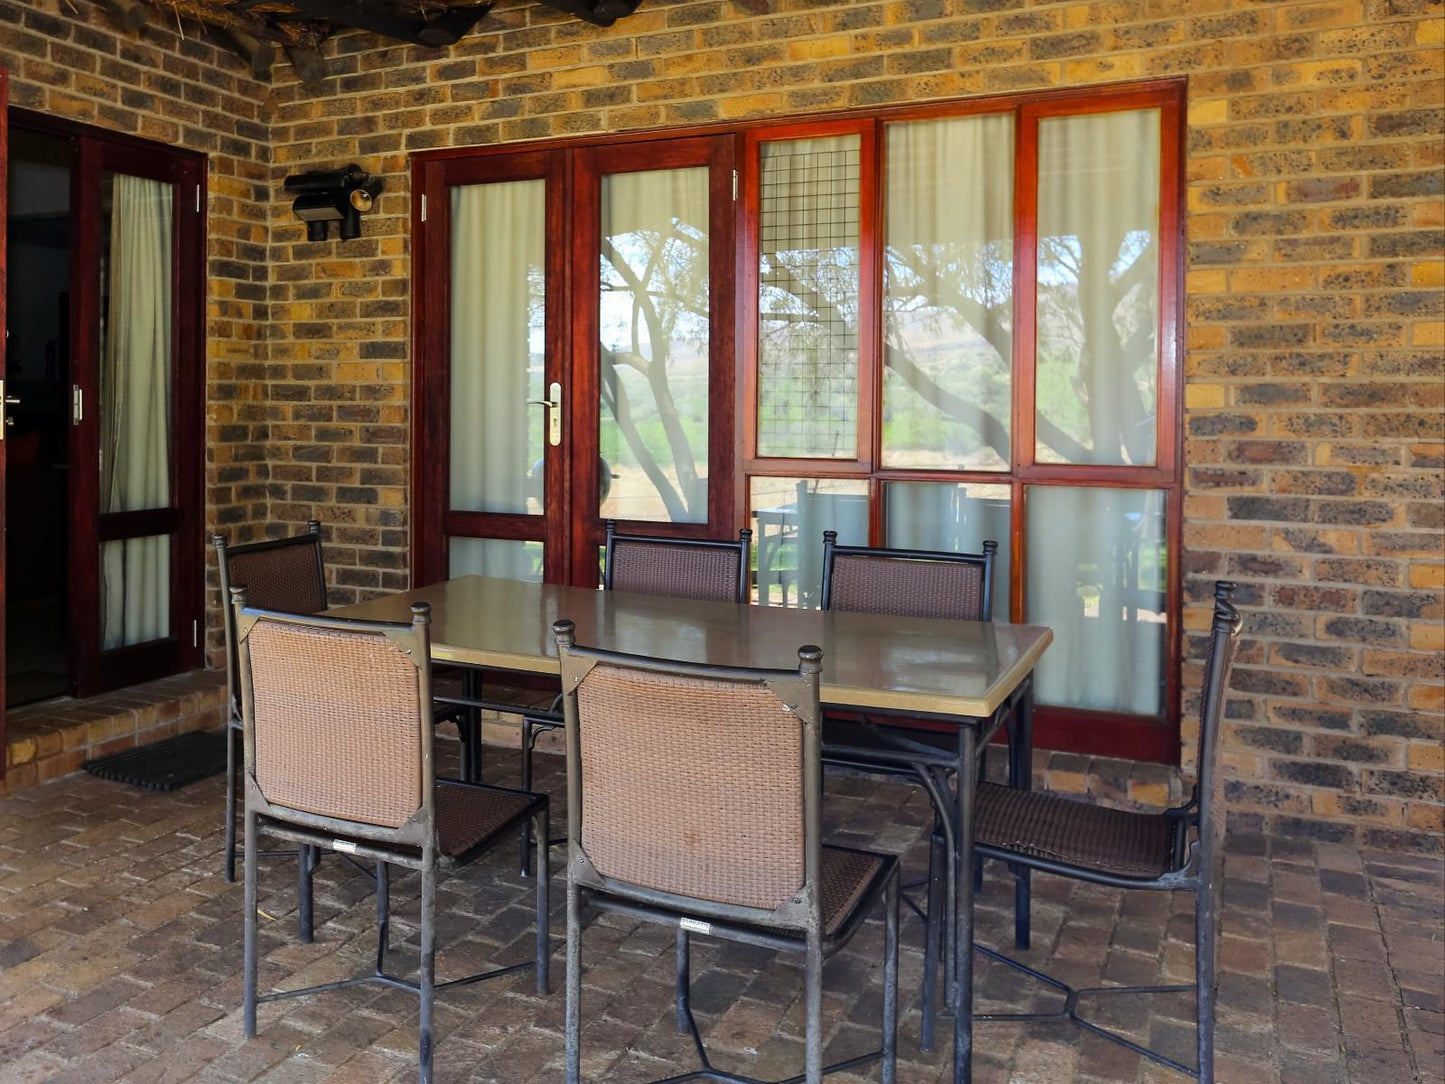 Bakubung Self Catering Chalets Pilanesberg Game Reserve North West Province South Africa 